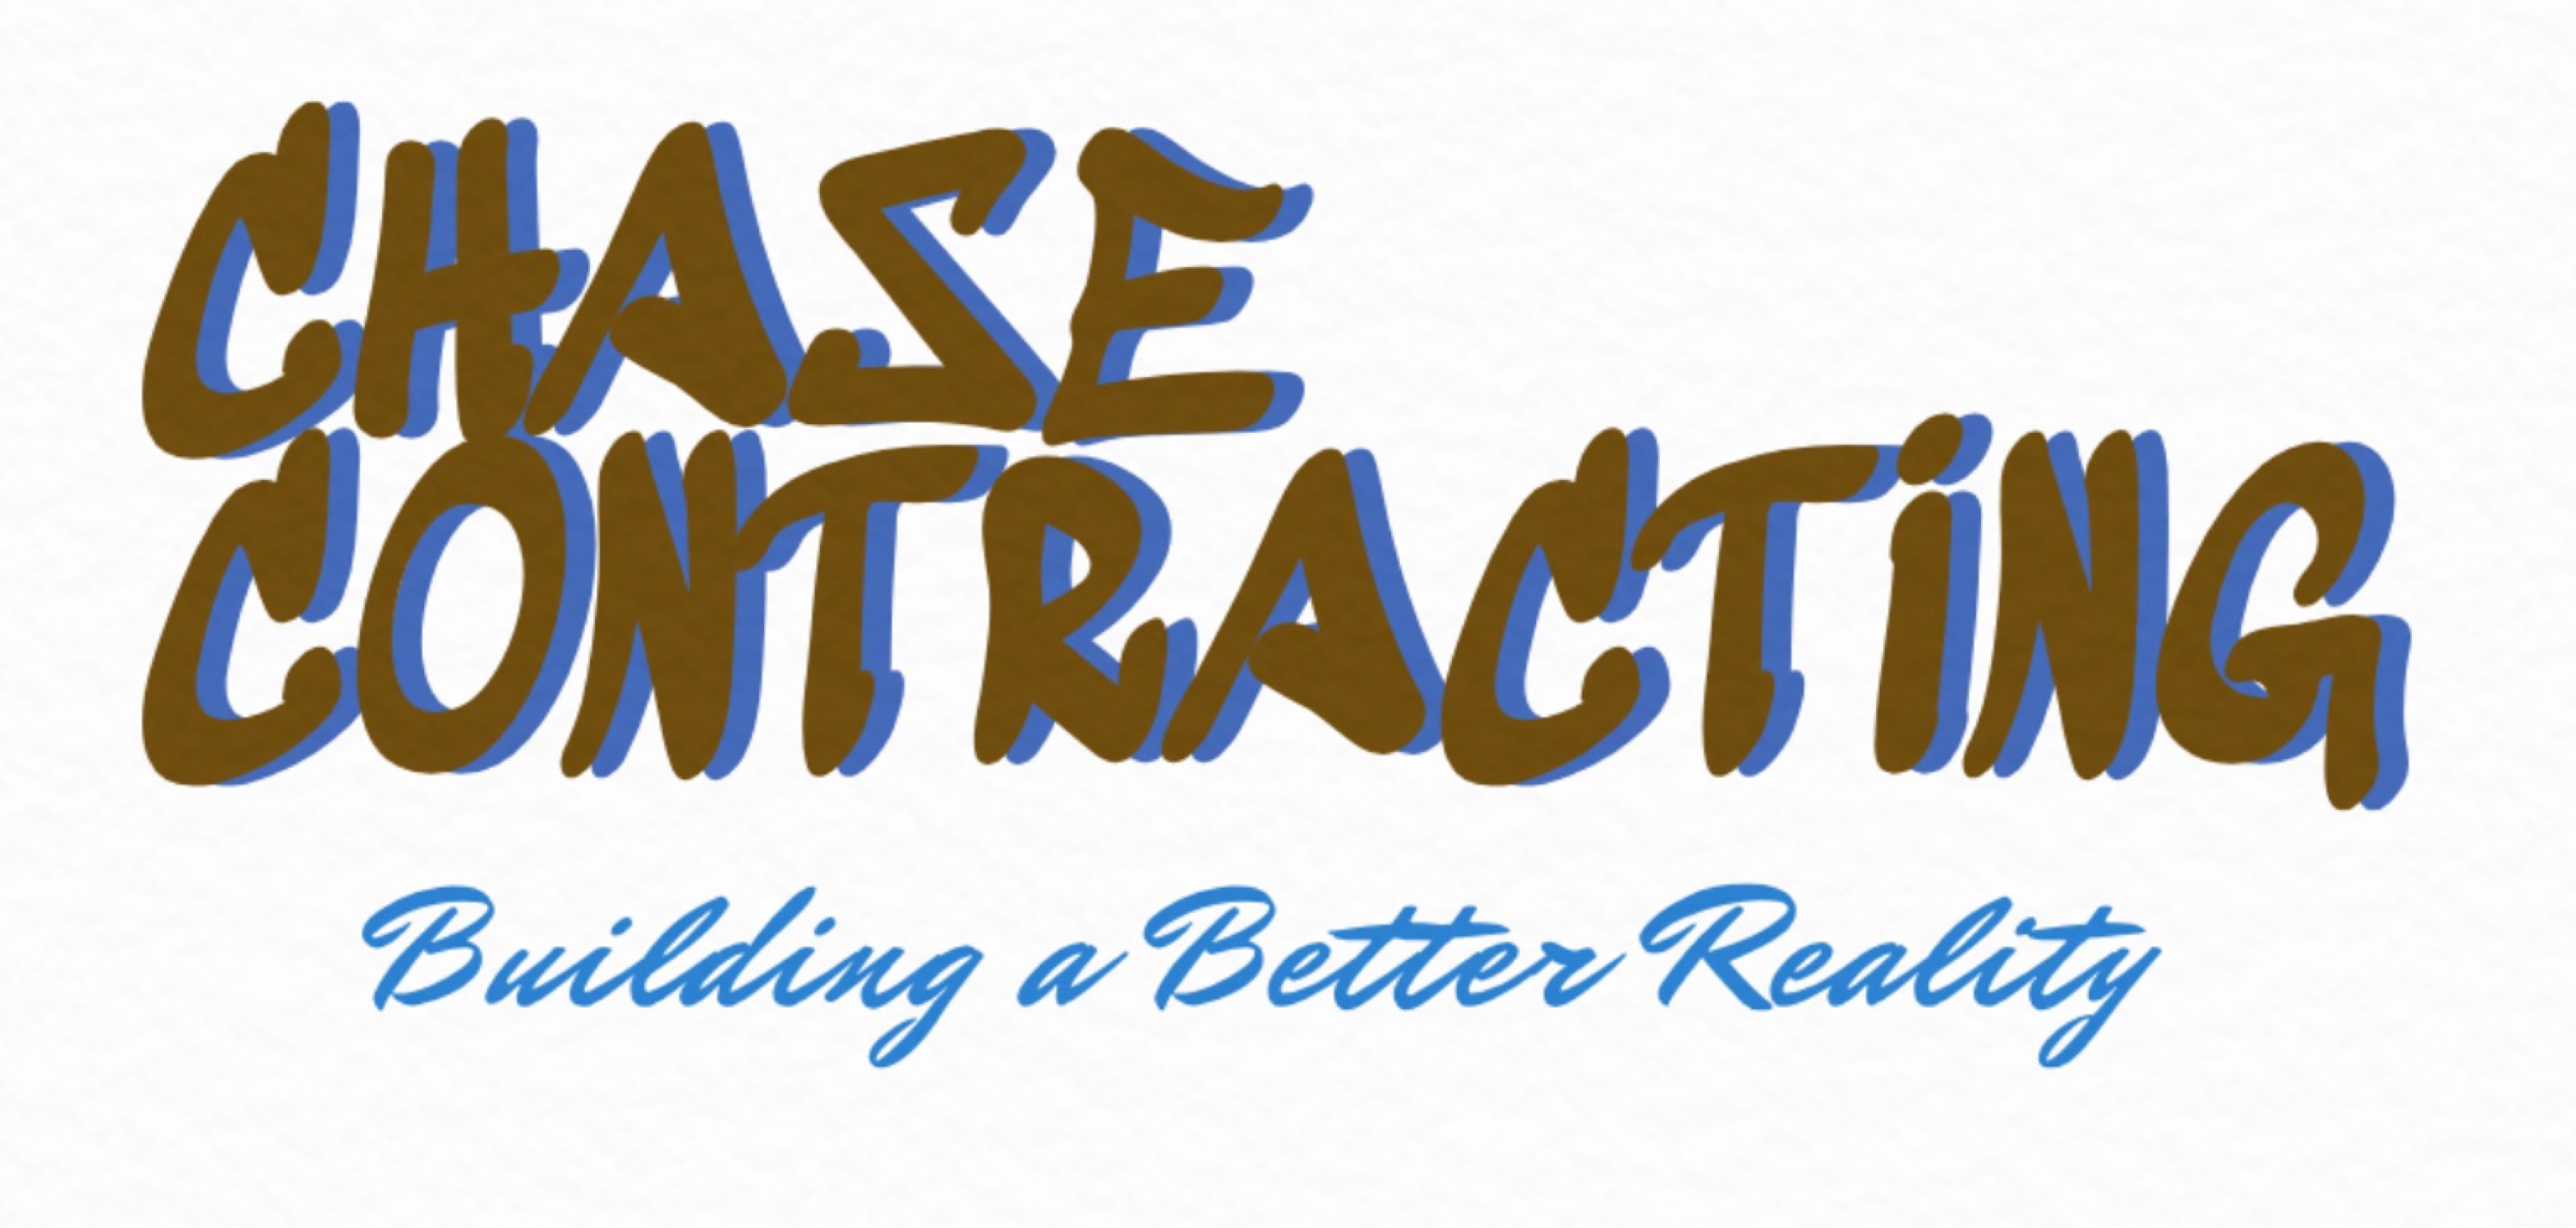 Chase Contracting Logo